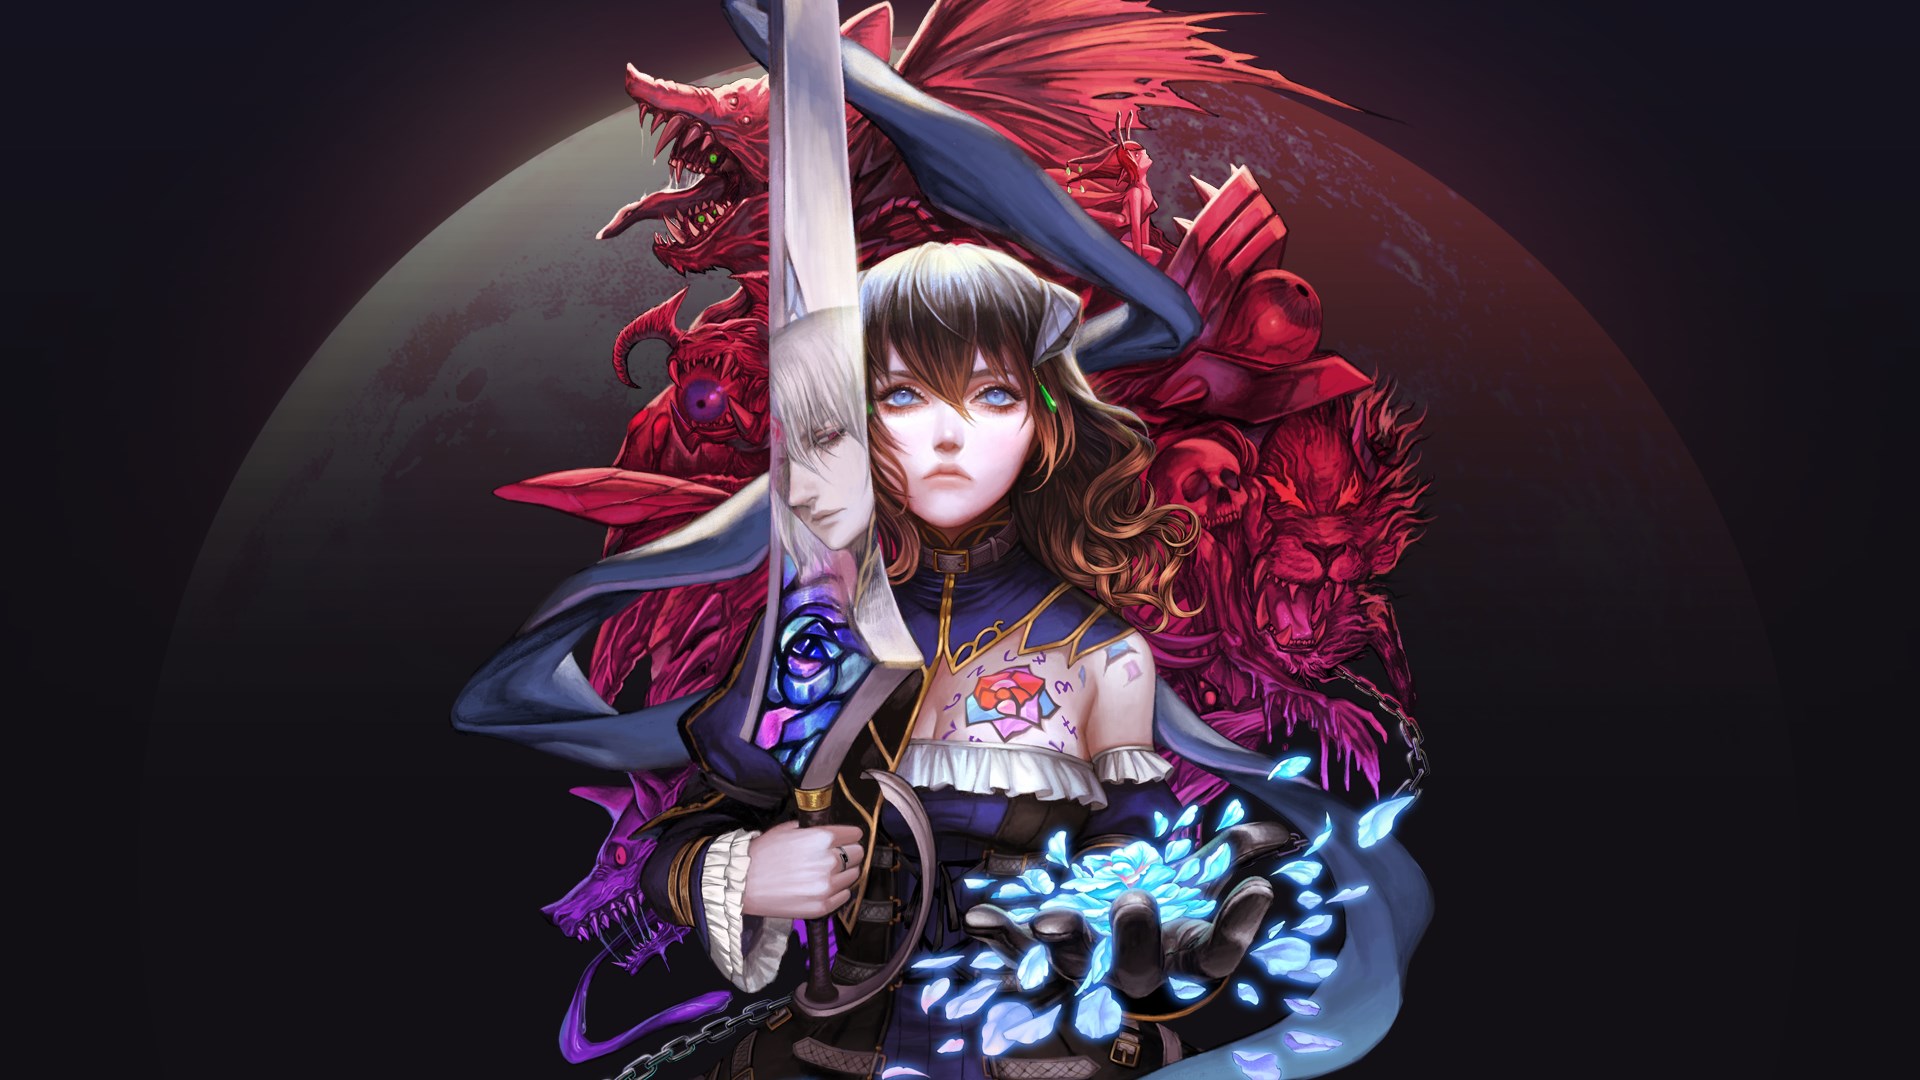 Bloodstained: Ritual Of The Night Is Receiving Updates, Patches To Fix The Switch Issues And Xbox One Glitches Has Been Submitted